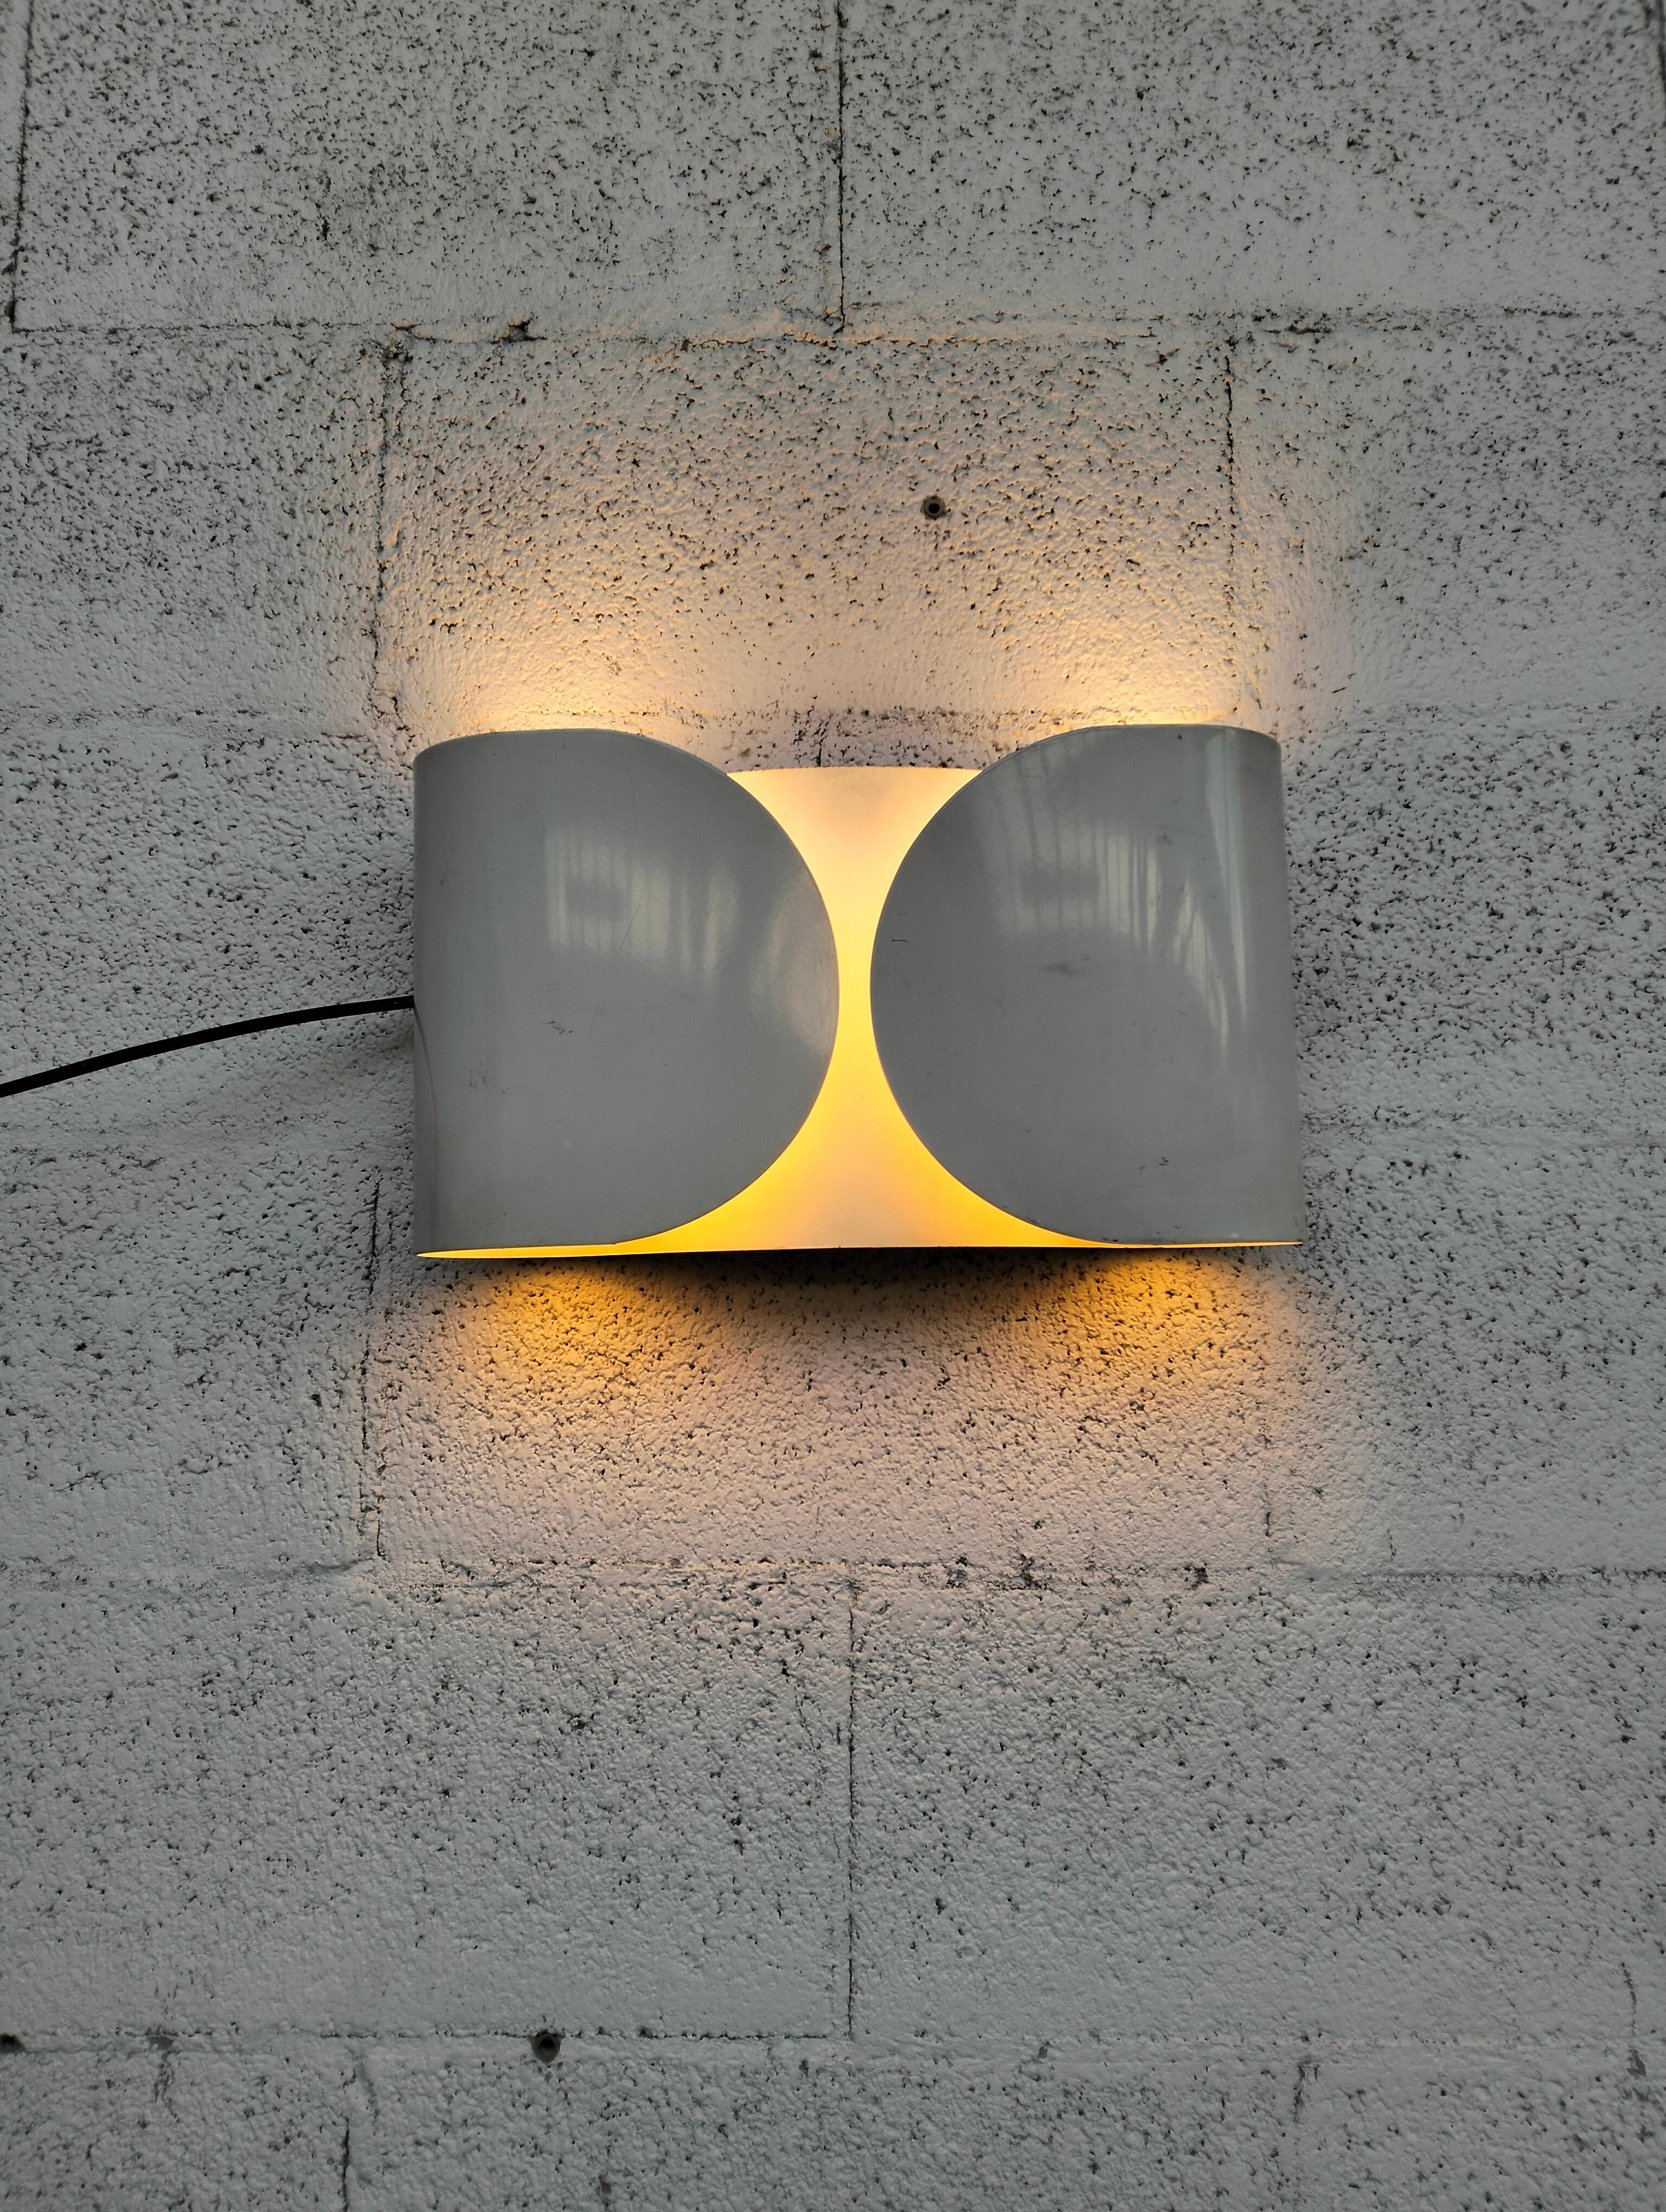 FLOS - Foglio, a historic piece from the Flos catalog designed by Tobia Scarpa, is a wall lamp with direct/indirect and partially diffused light with a steel structure.
Born in Venice in 1935, Tobia Scarpa is the son of the famous architect Carlo